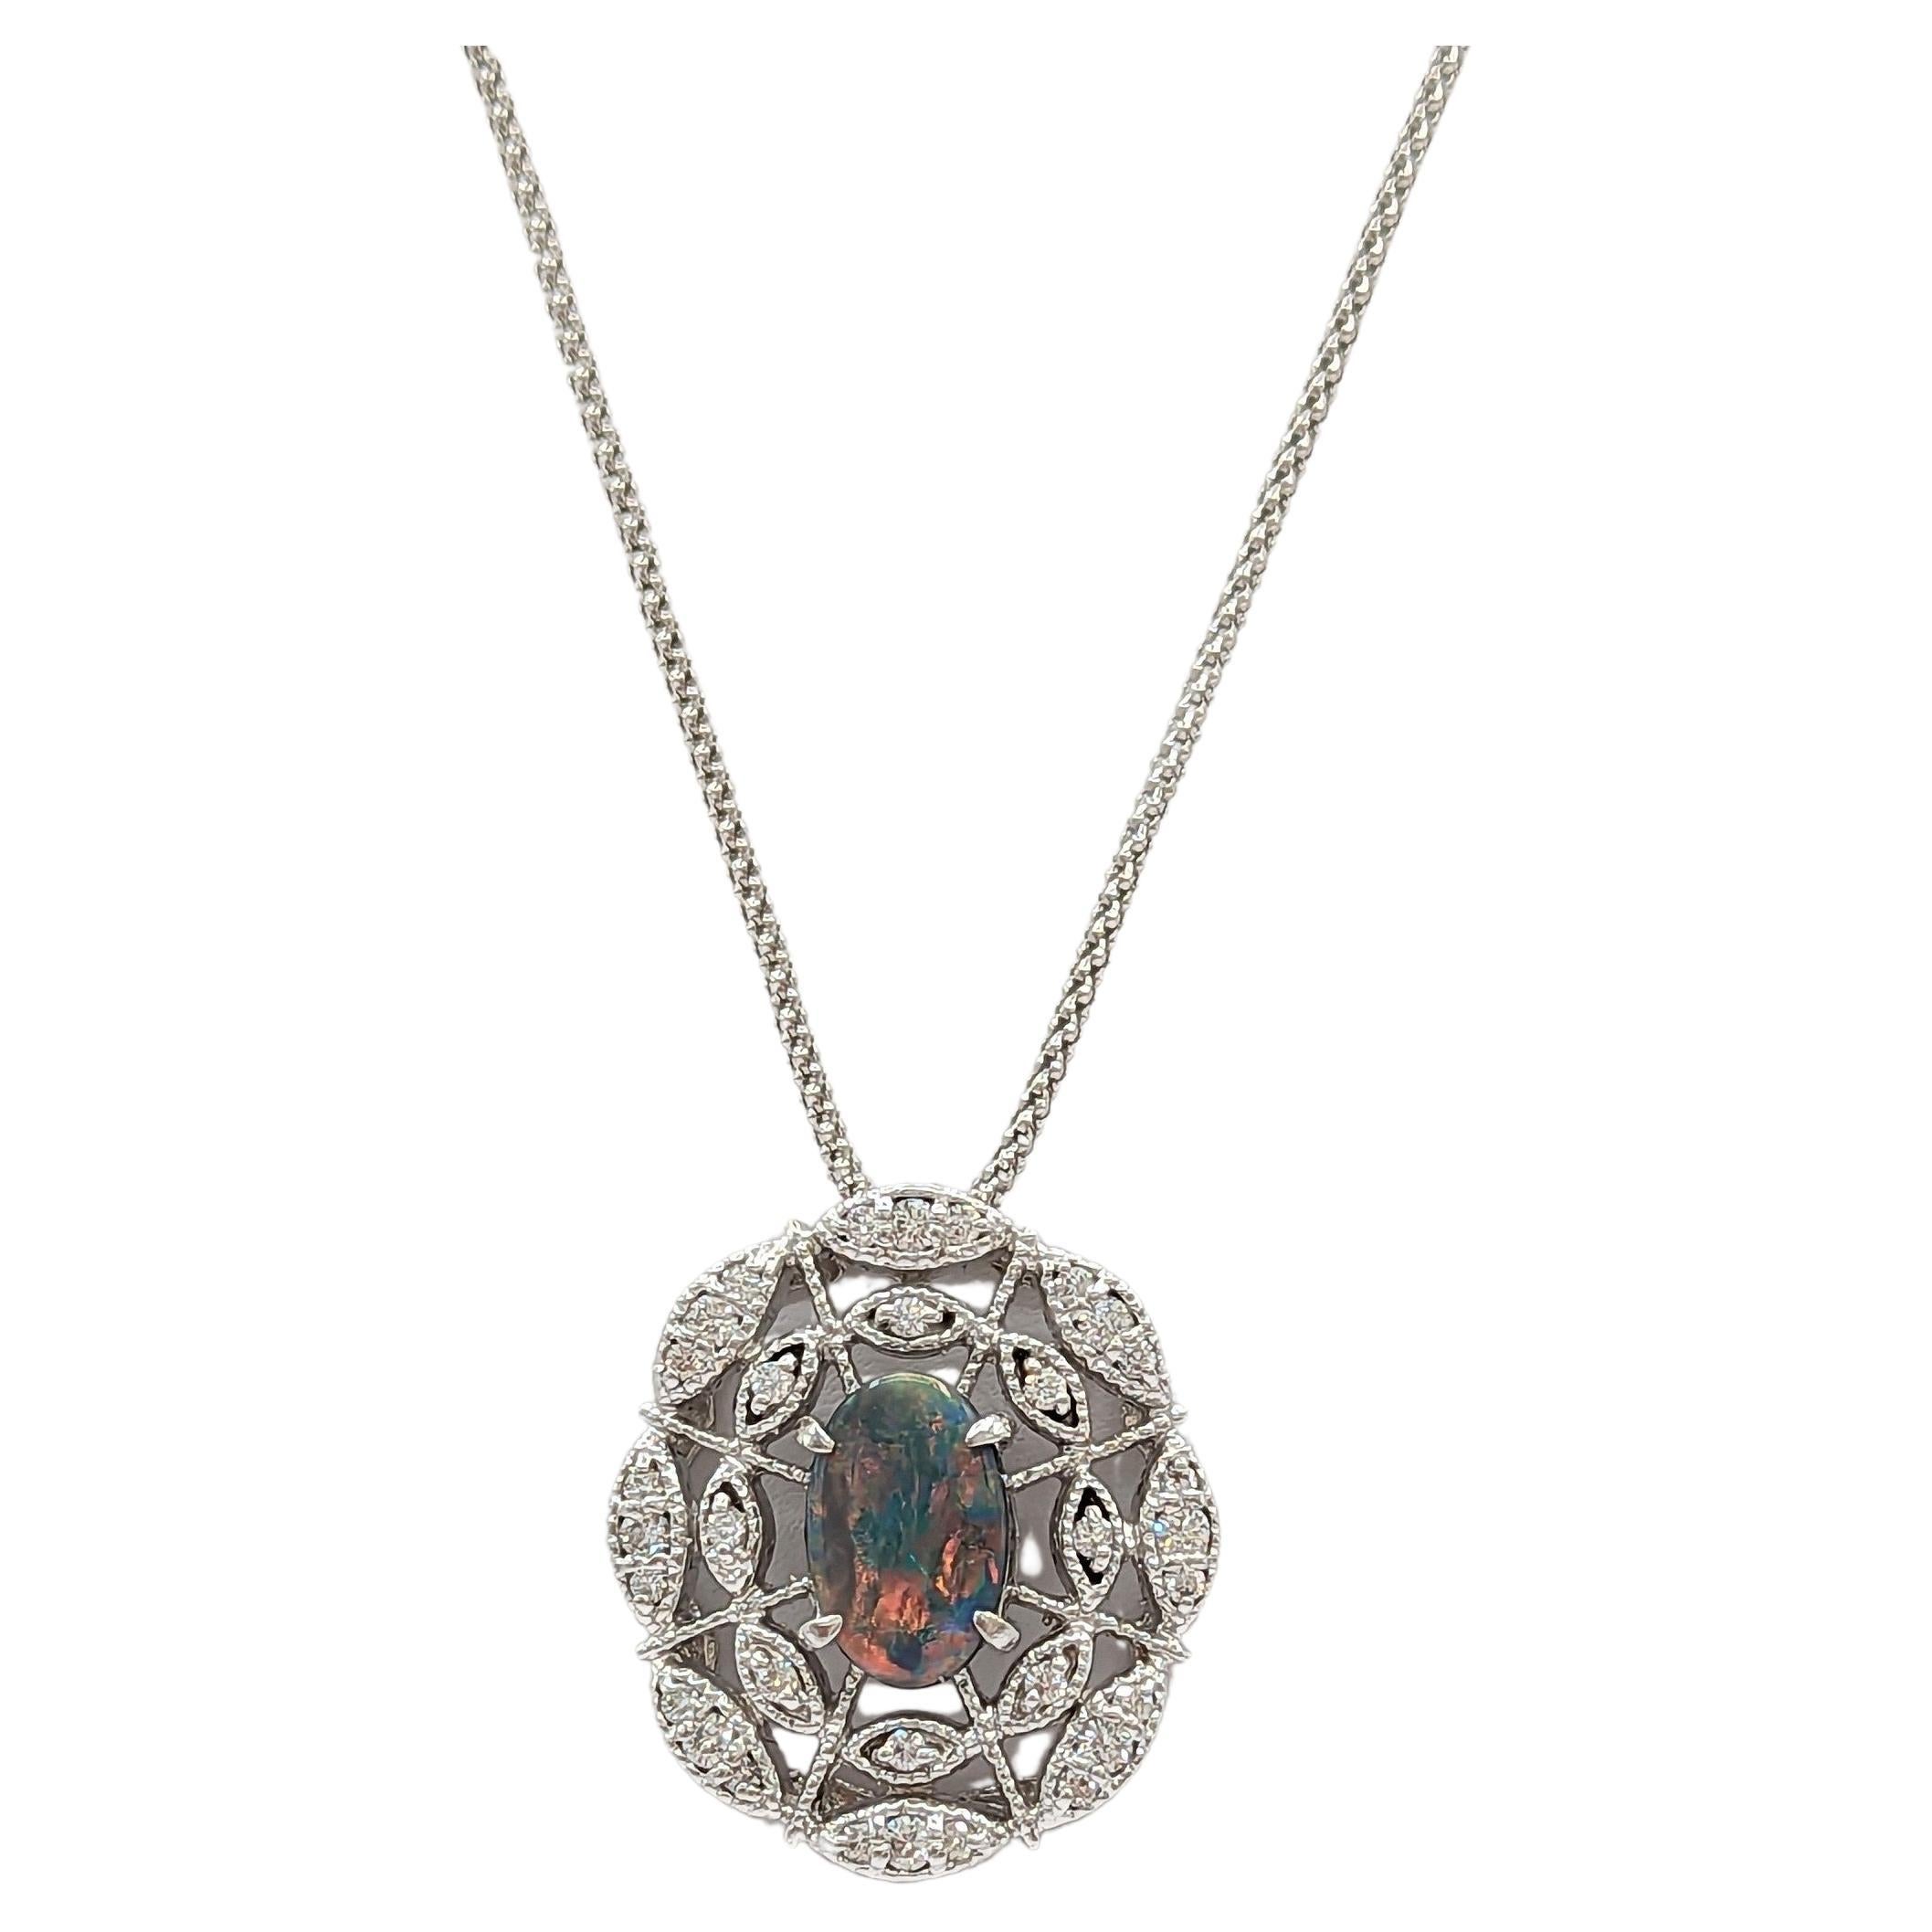 Boulder Opal and White Diamond Pendant Necklace in 18K White Gold